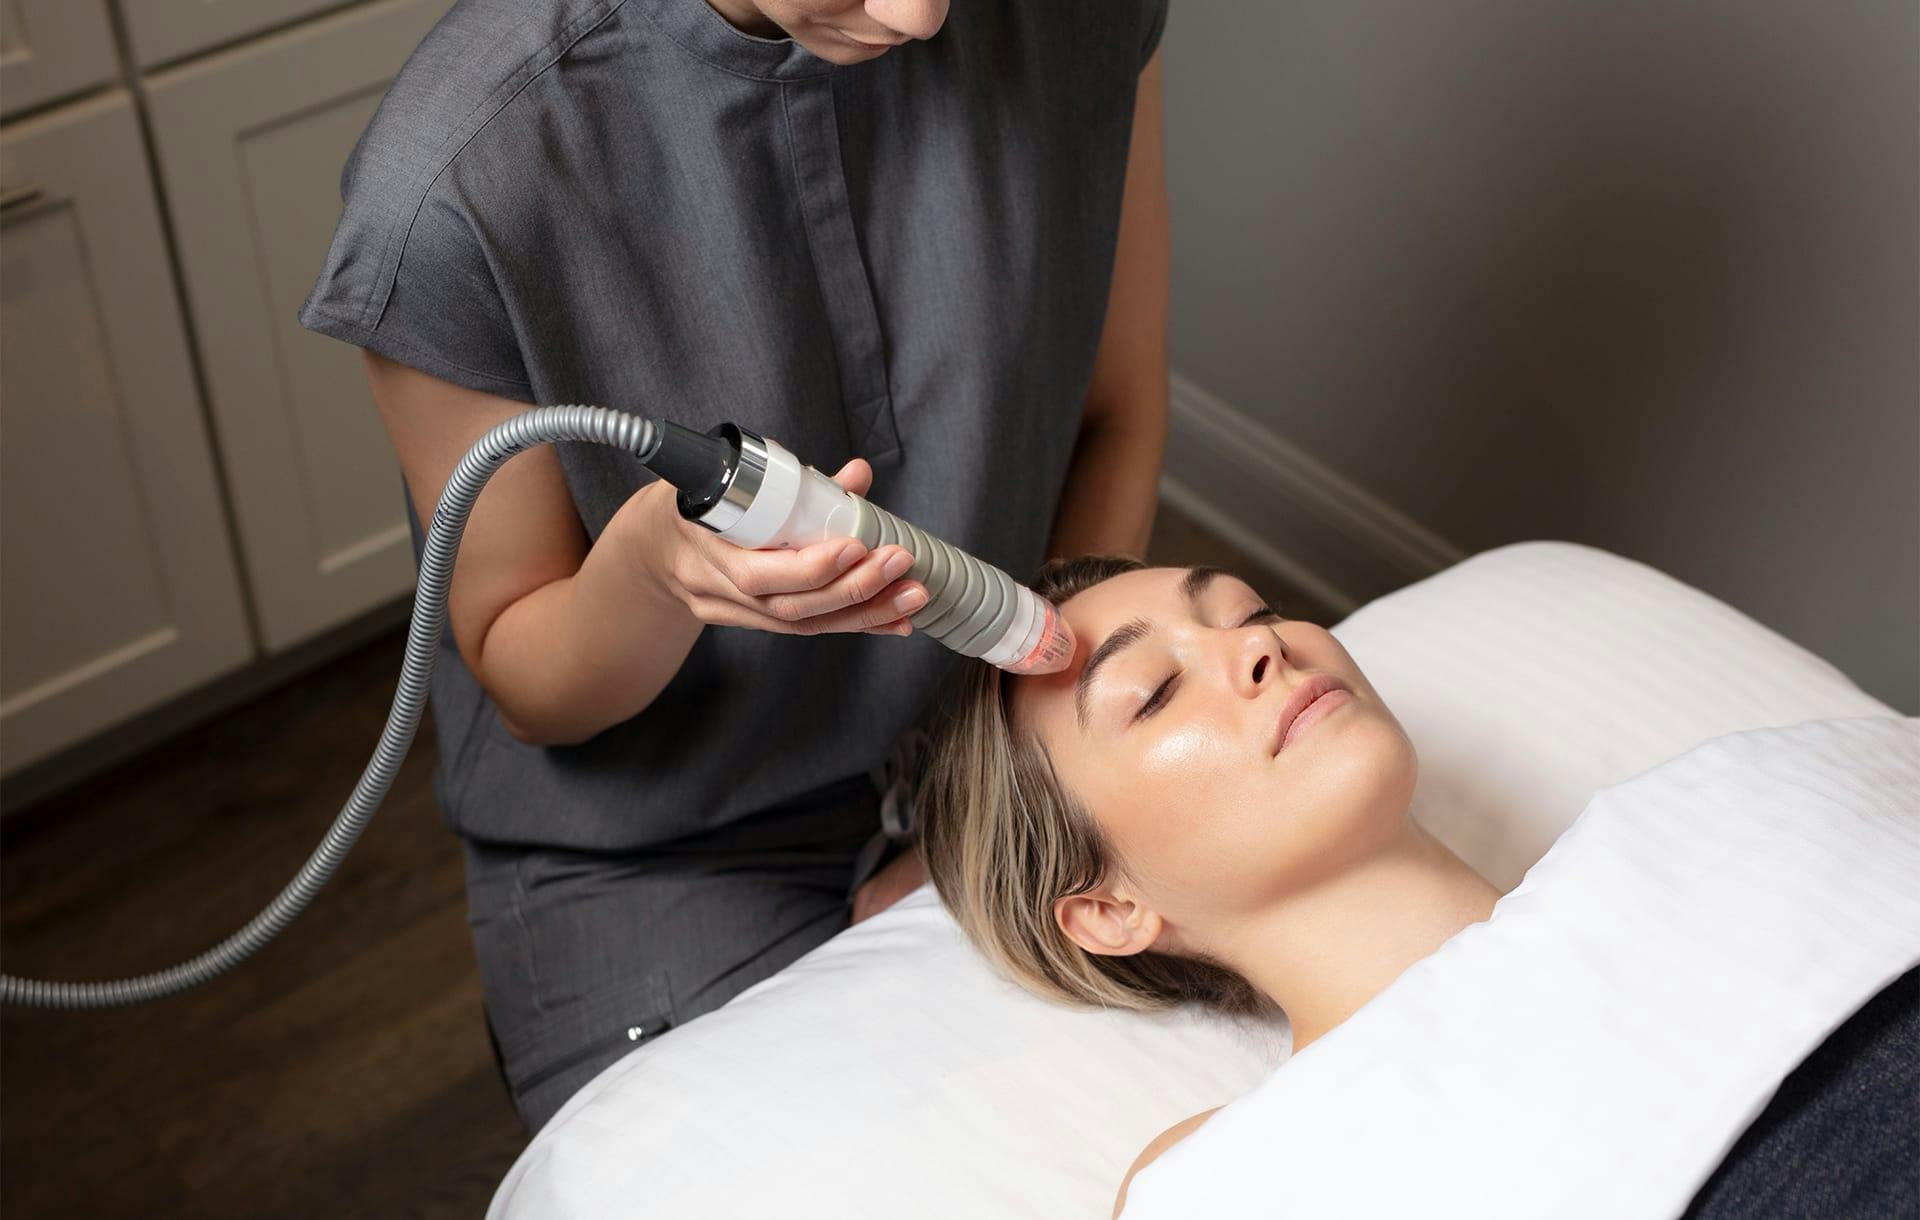 woman getting laser treatment